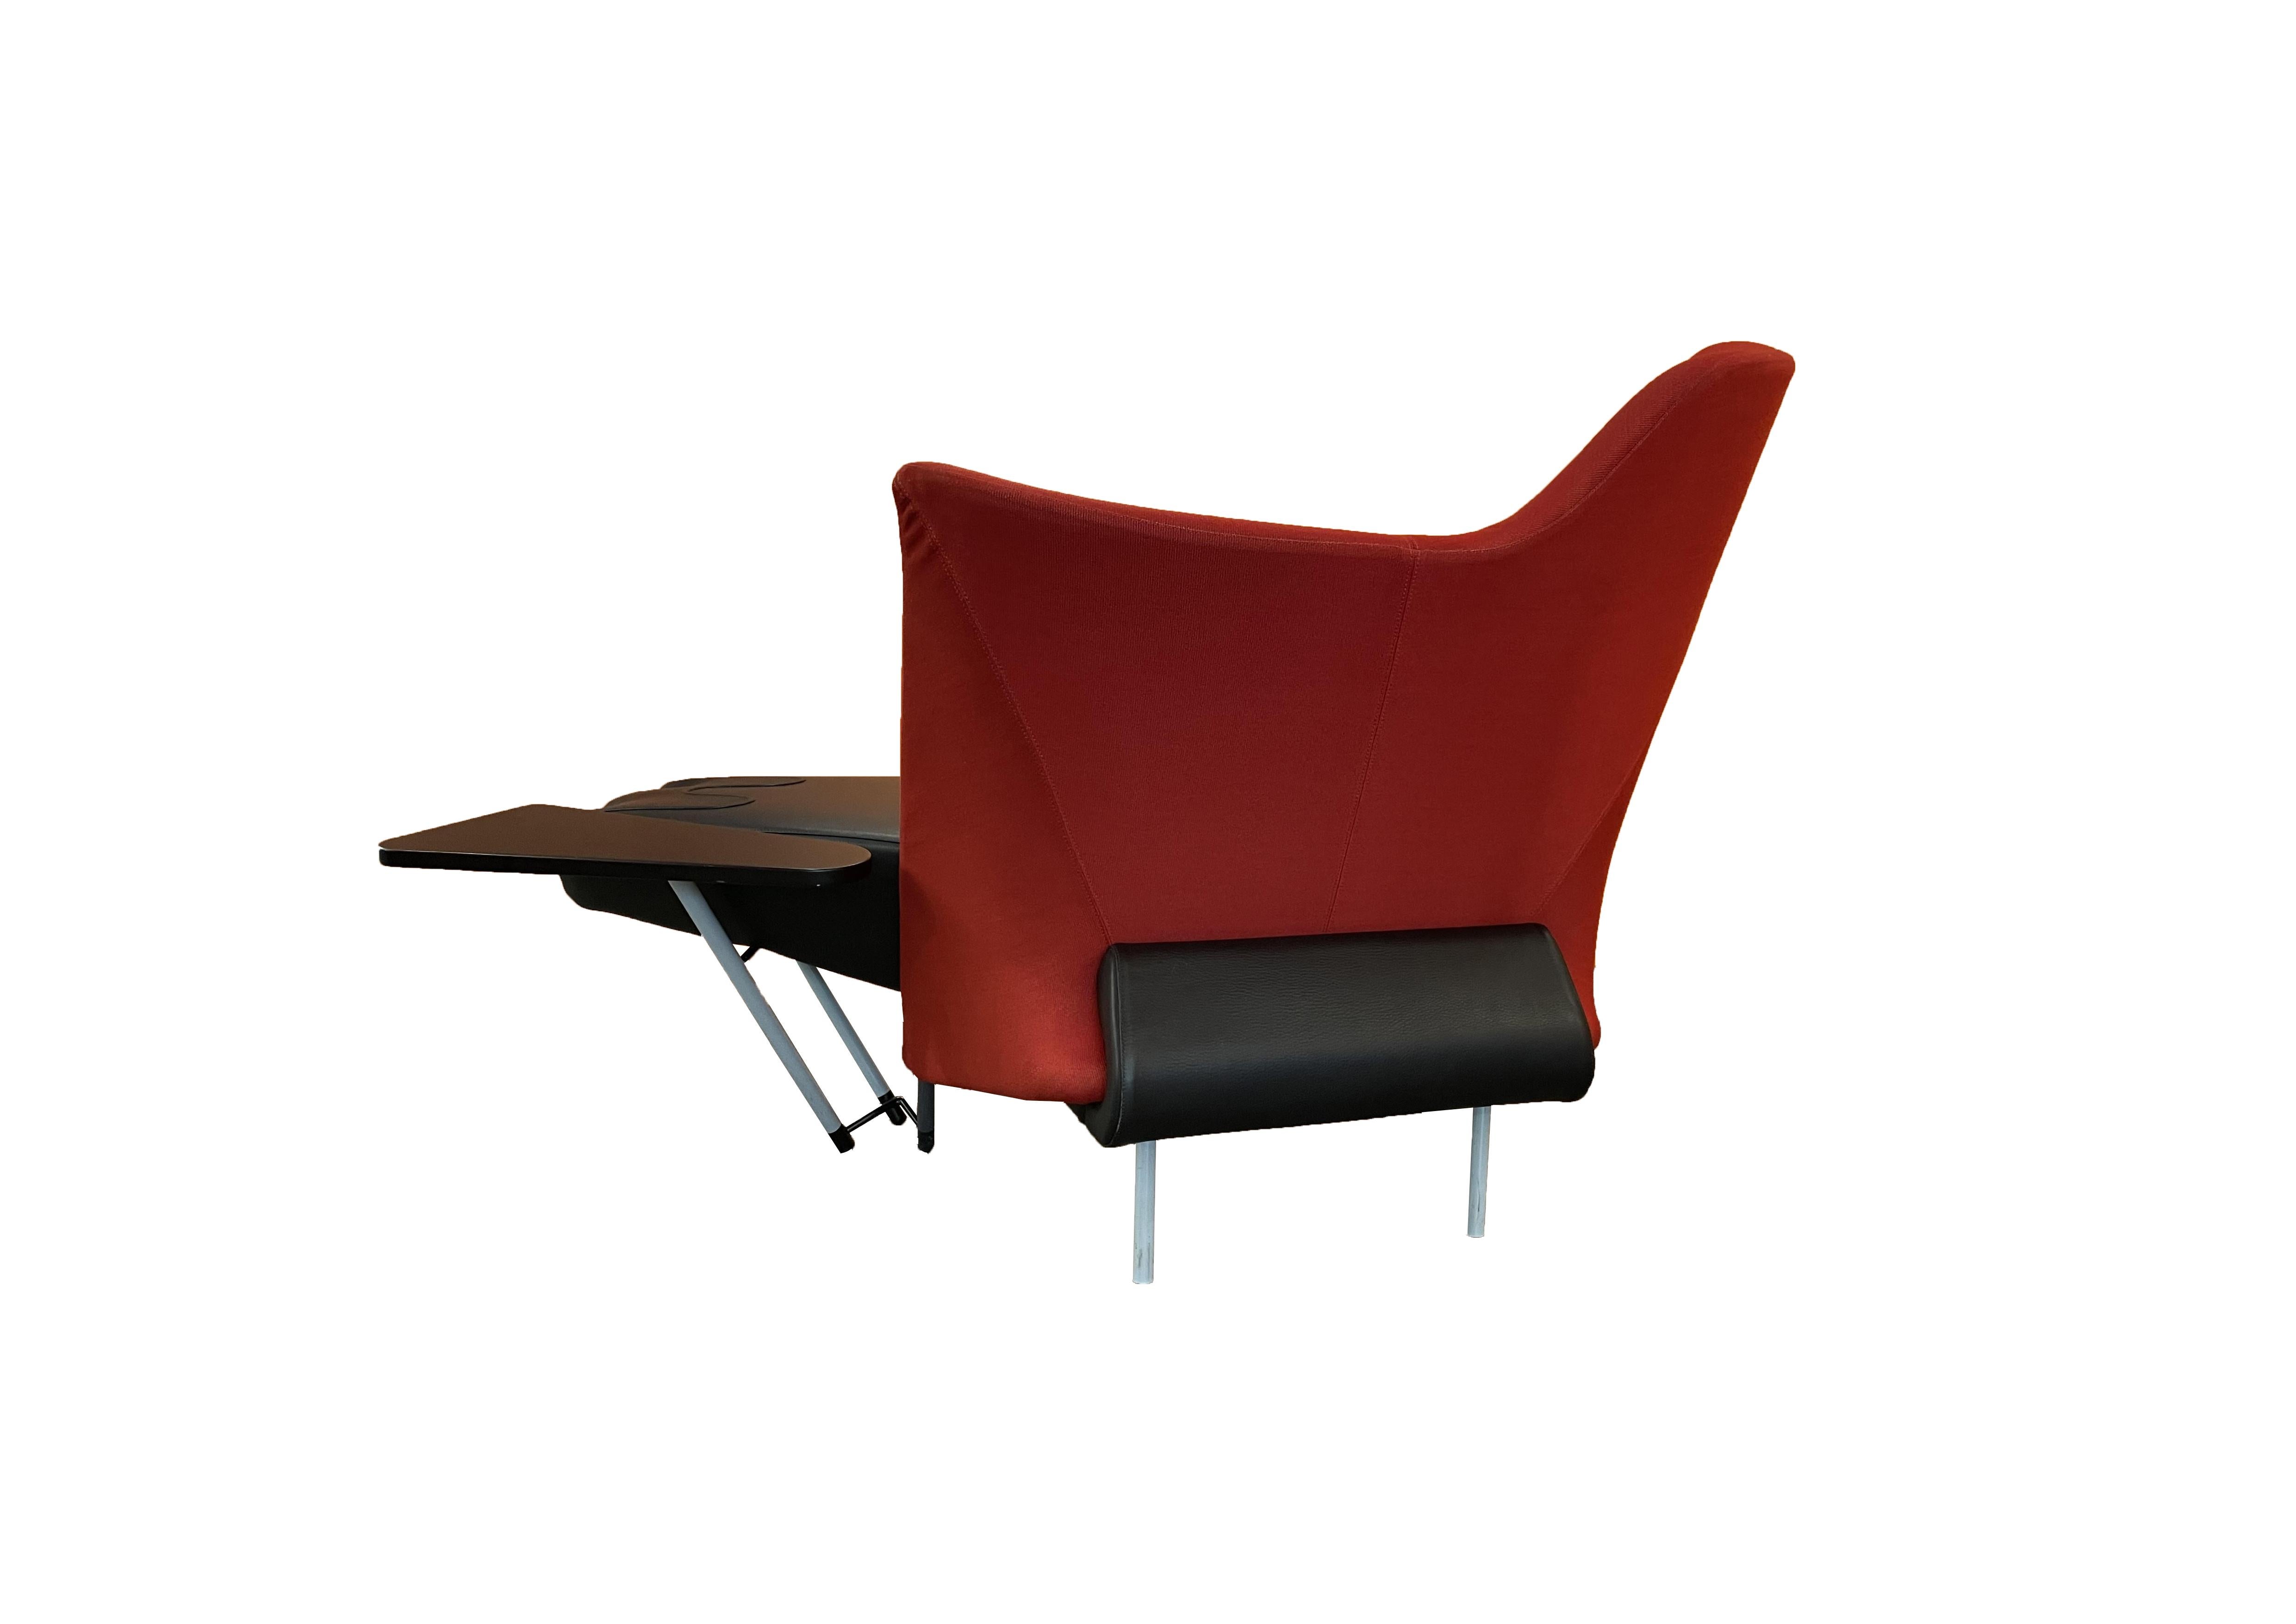 Torso lounge chair by Paolo Deganello for Cassina
The Torso lounge chair was designed by Paolo Deganello in 1982 and produced for Cassina. With its asymmetrical and sculptural red backrest and black leather seat, it is a true iconic piece. The